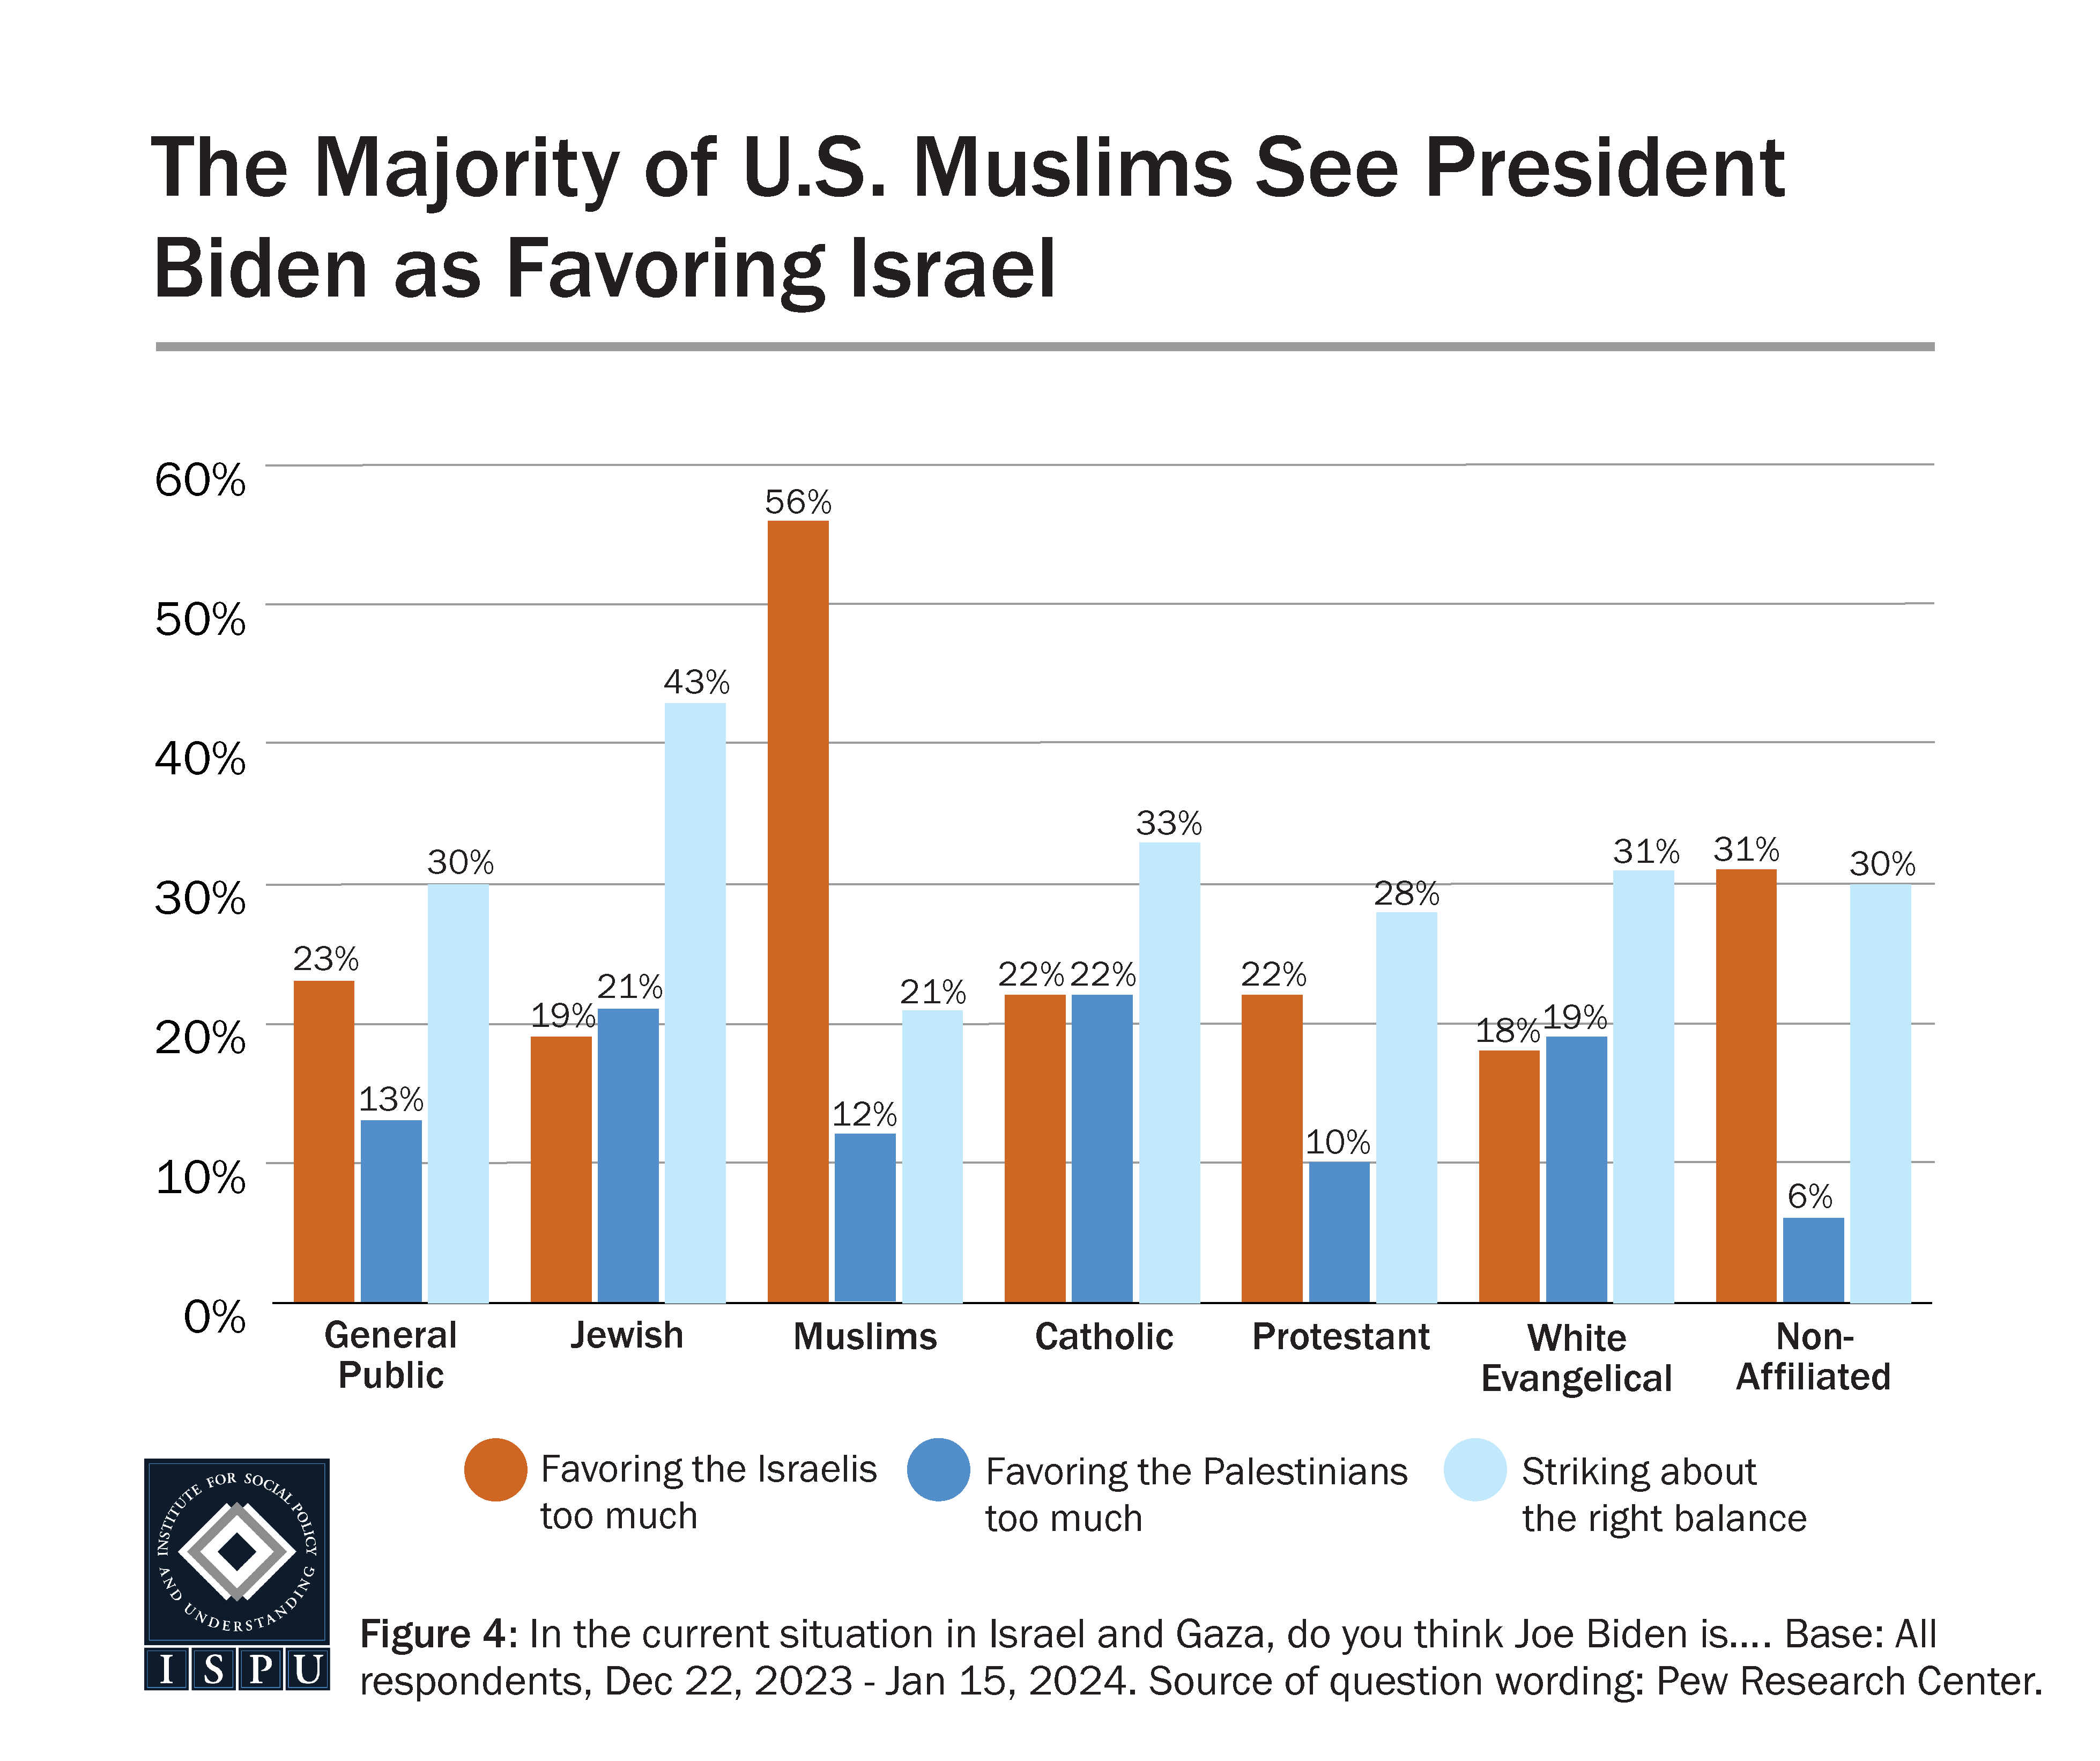 A bar graph showing who the general public and religious groups in the U.S. think President Biden is favoring in the current situation in Israel and Gaza.